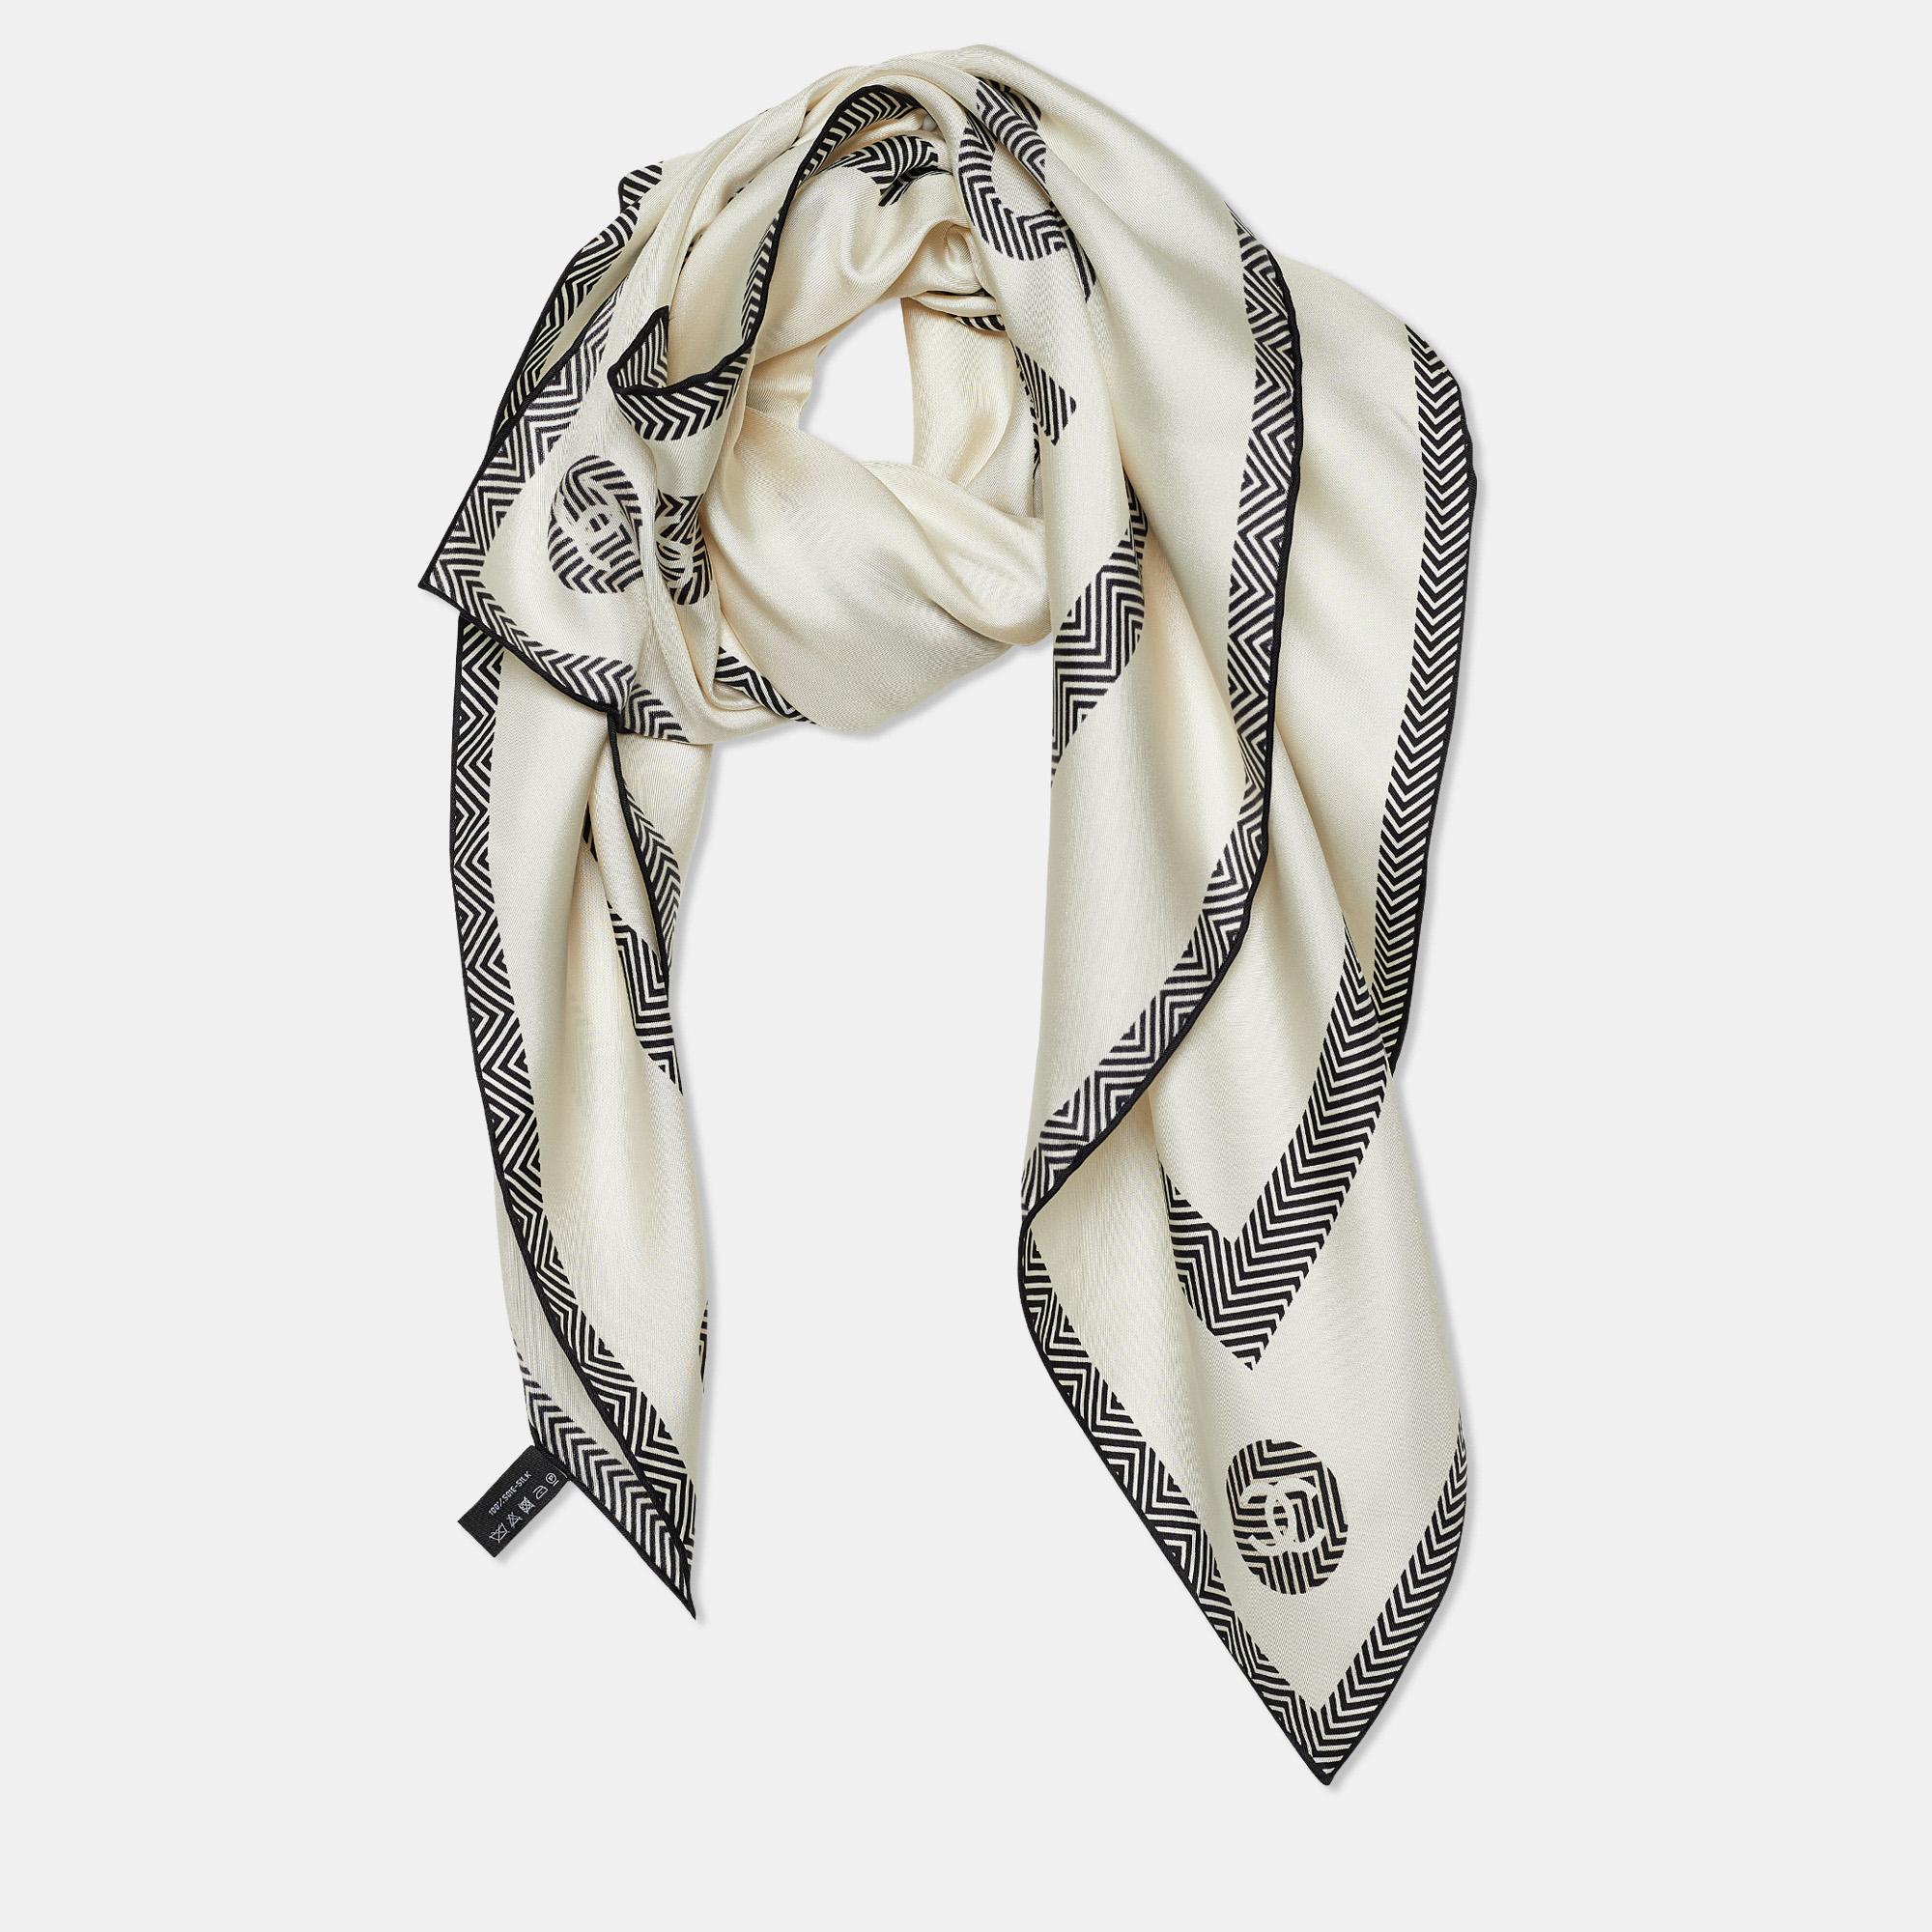 The perfect punctuation to your stylish look will be this Chanel scarf! It has been stitched using soft silk in a white shade and adorned with iconic CC logo prints all over. Wrap it around your neck to accessorize the chic way!

